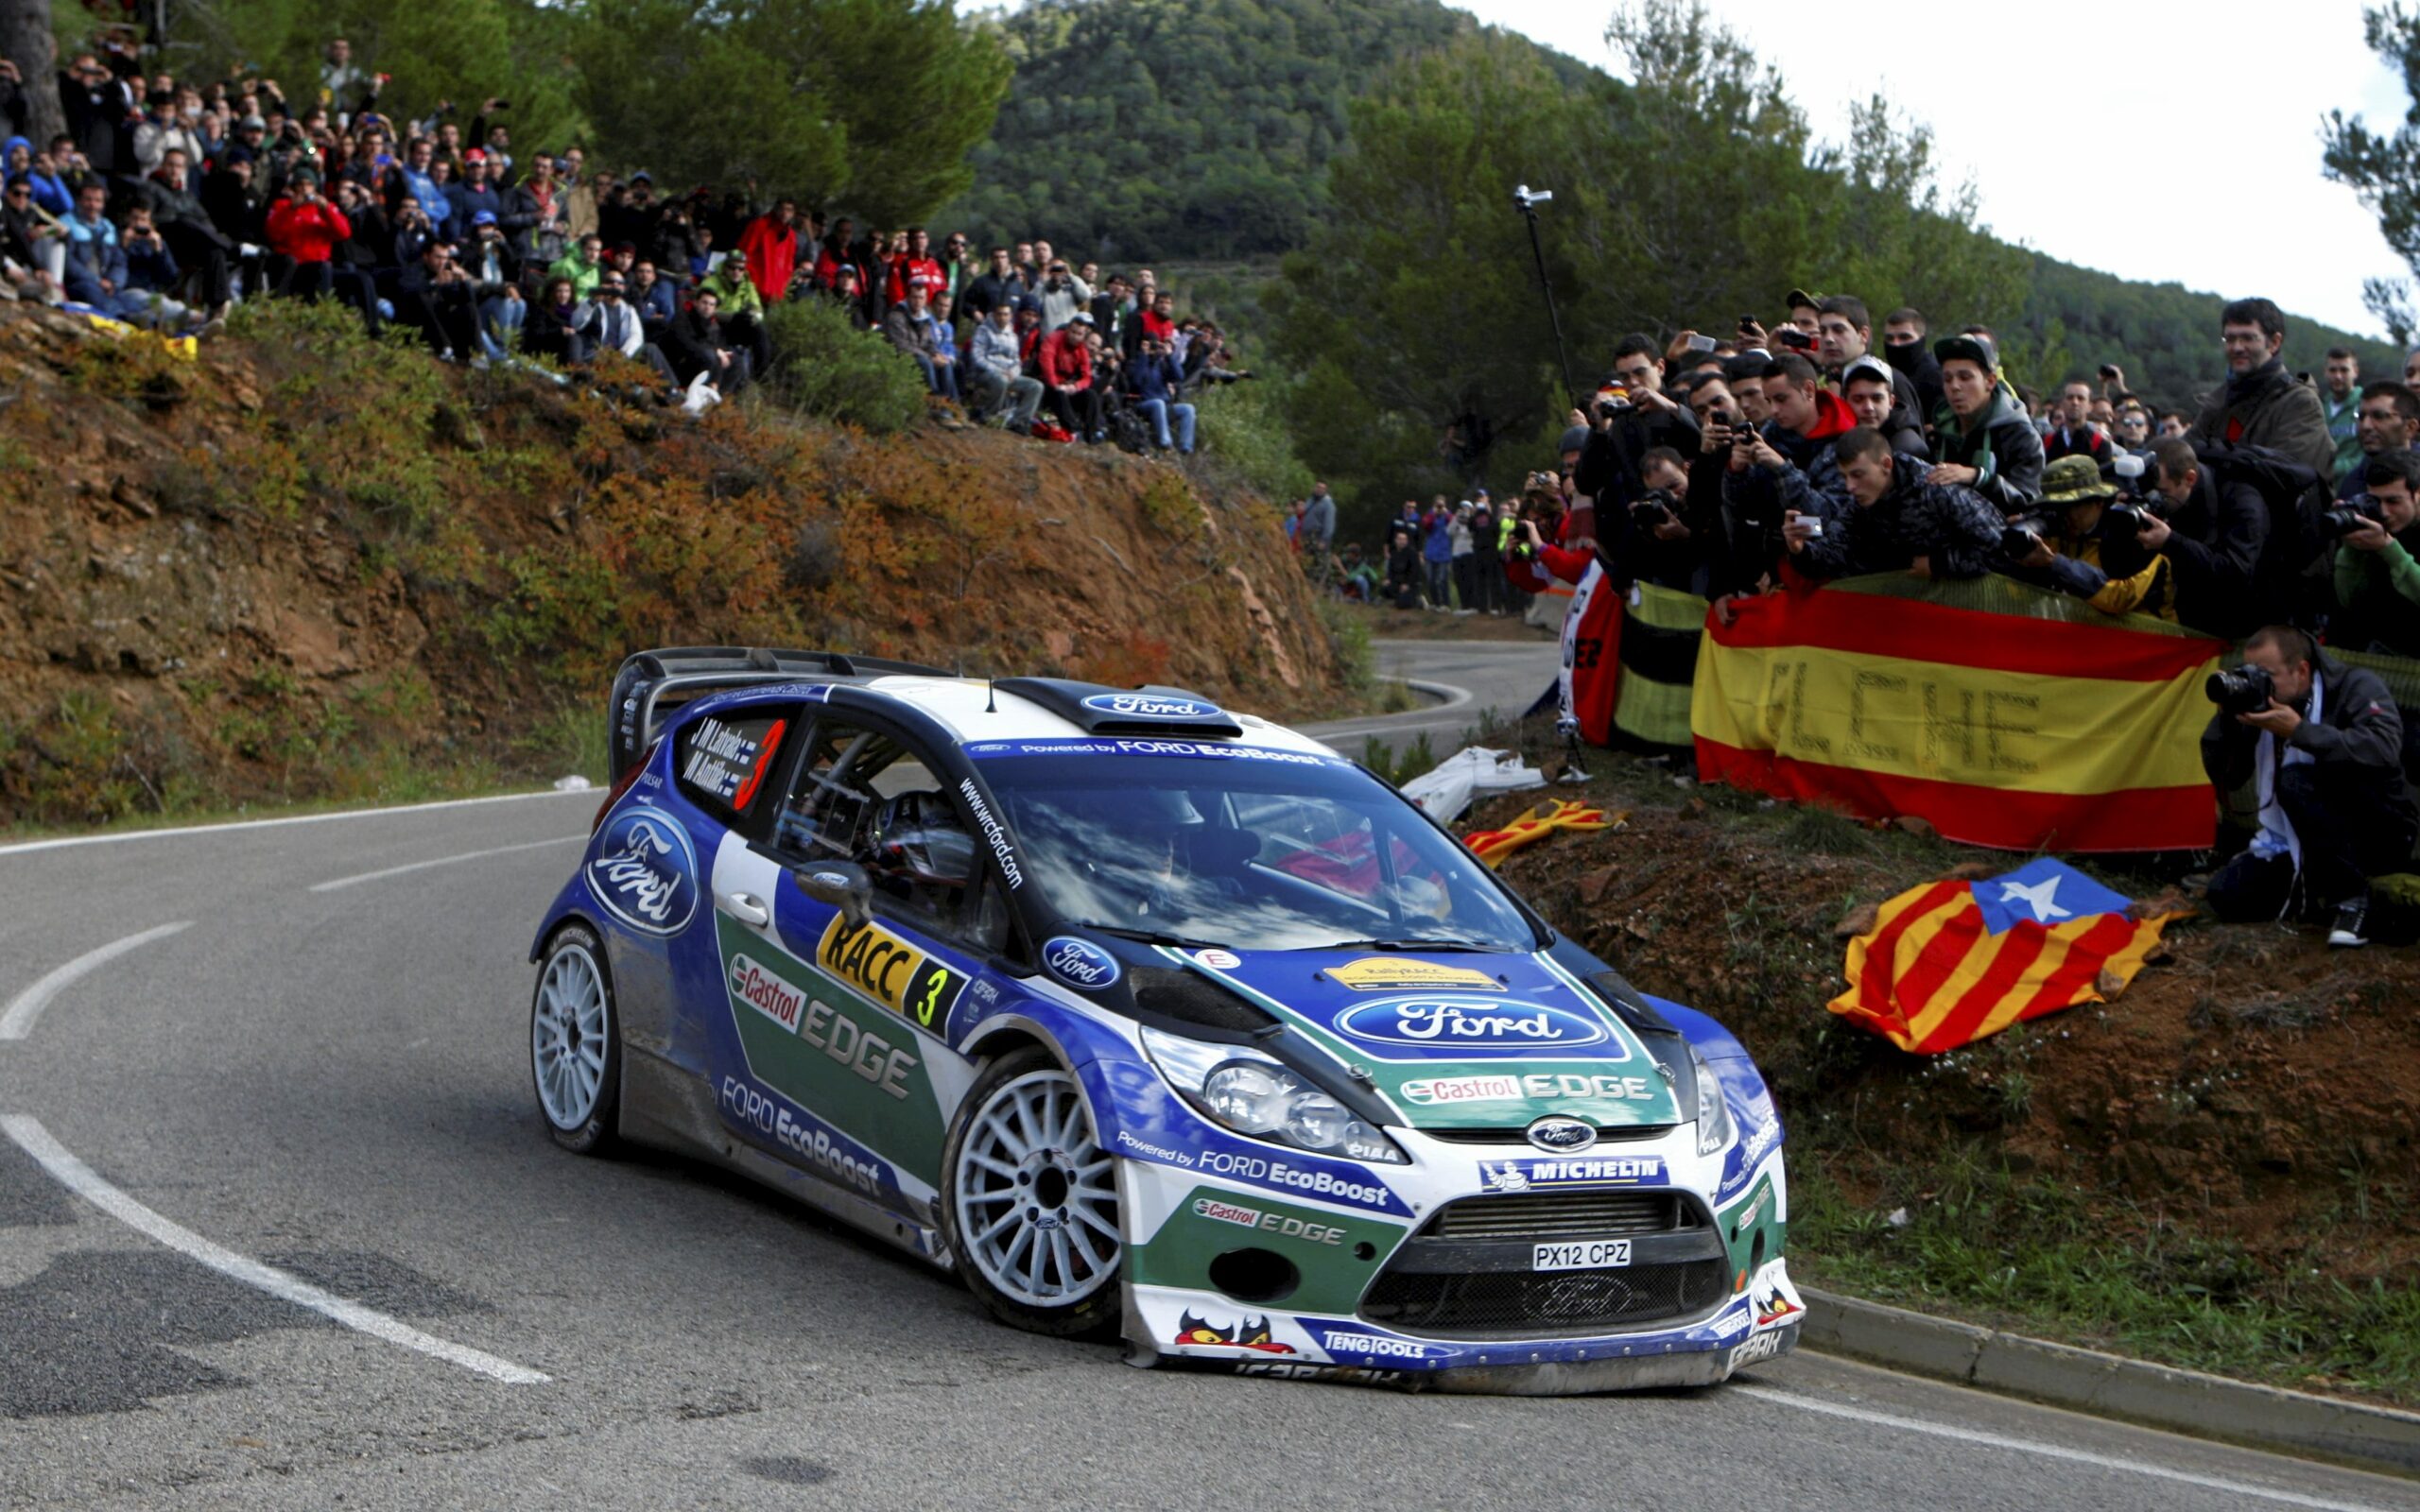 Ford finishes up with a podium result in it's final WRC event